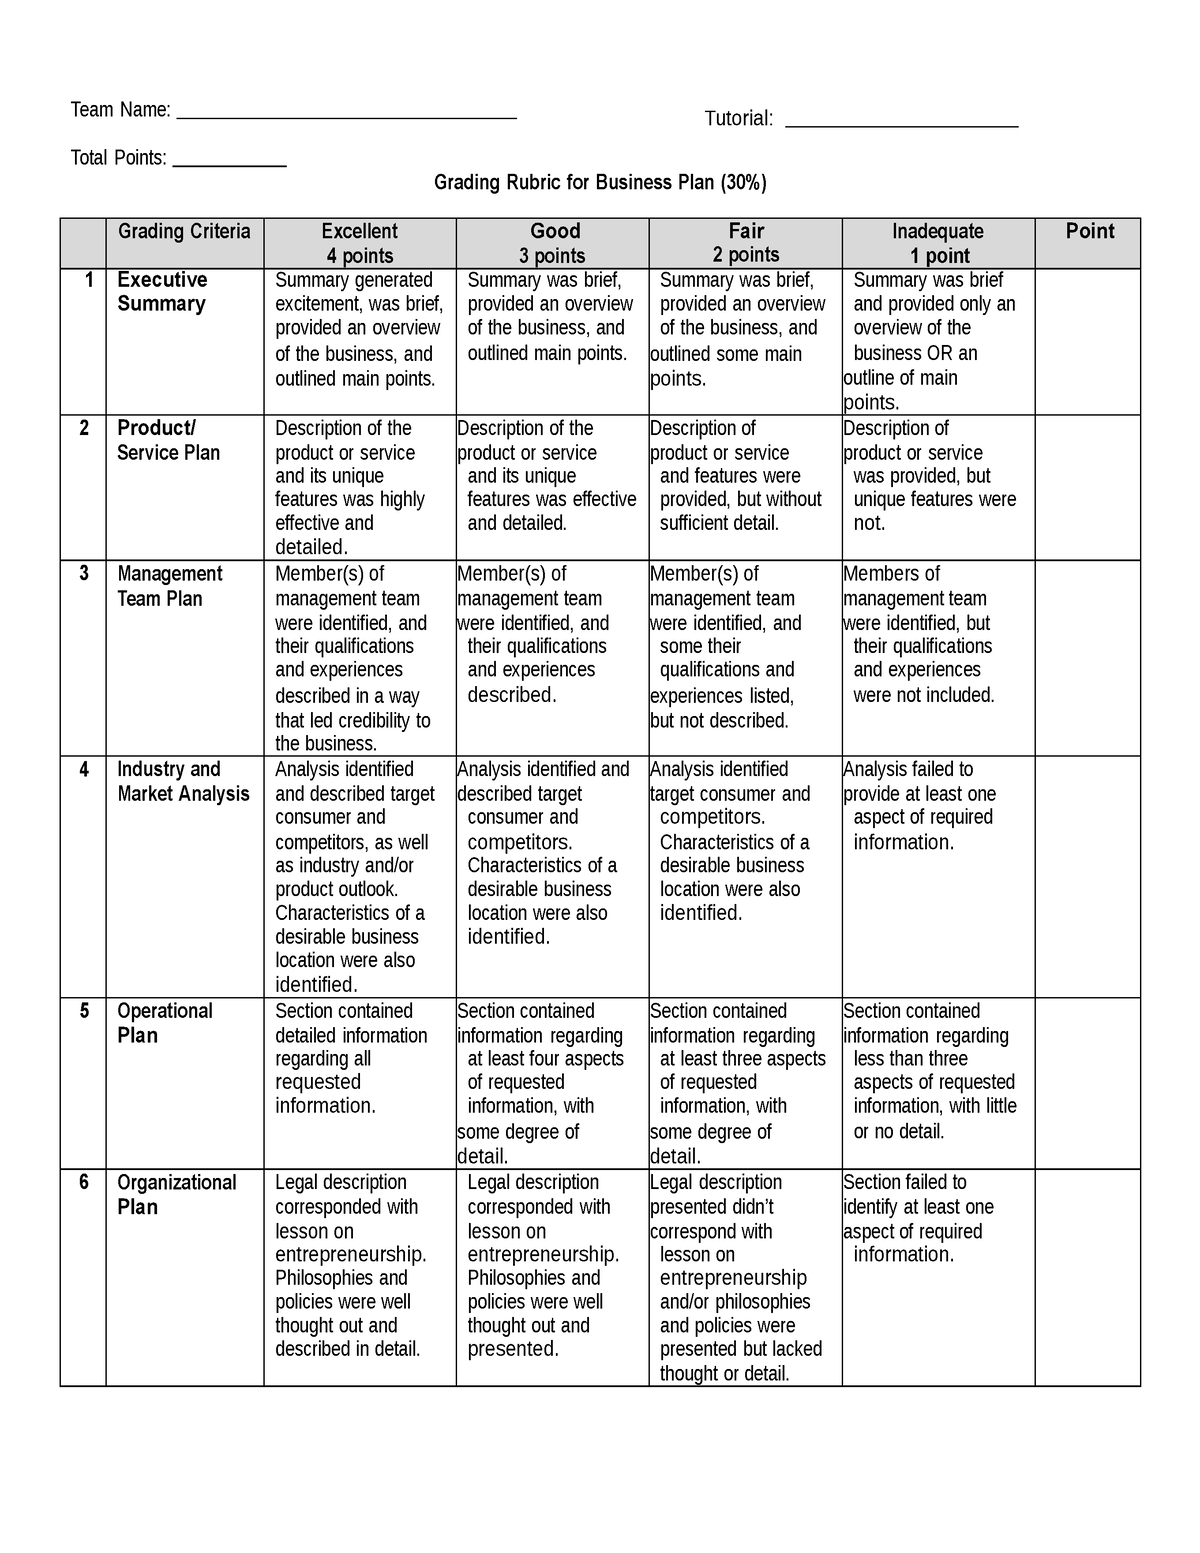 rubrics for business plan paper evaluation brainly